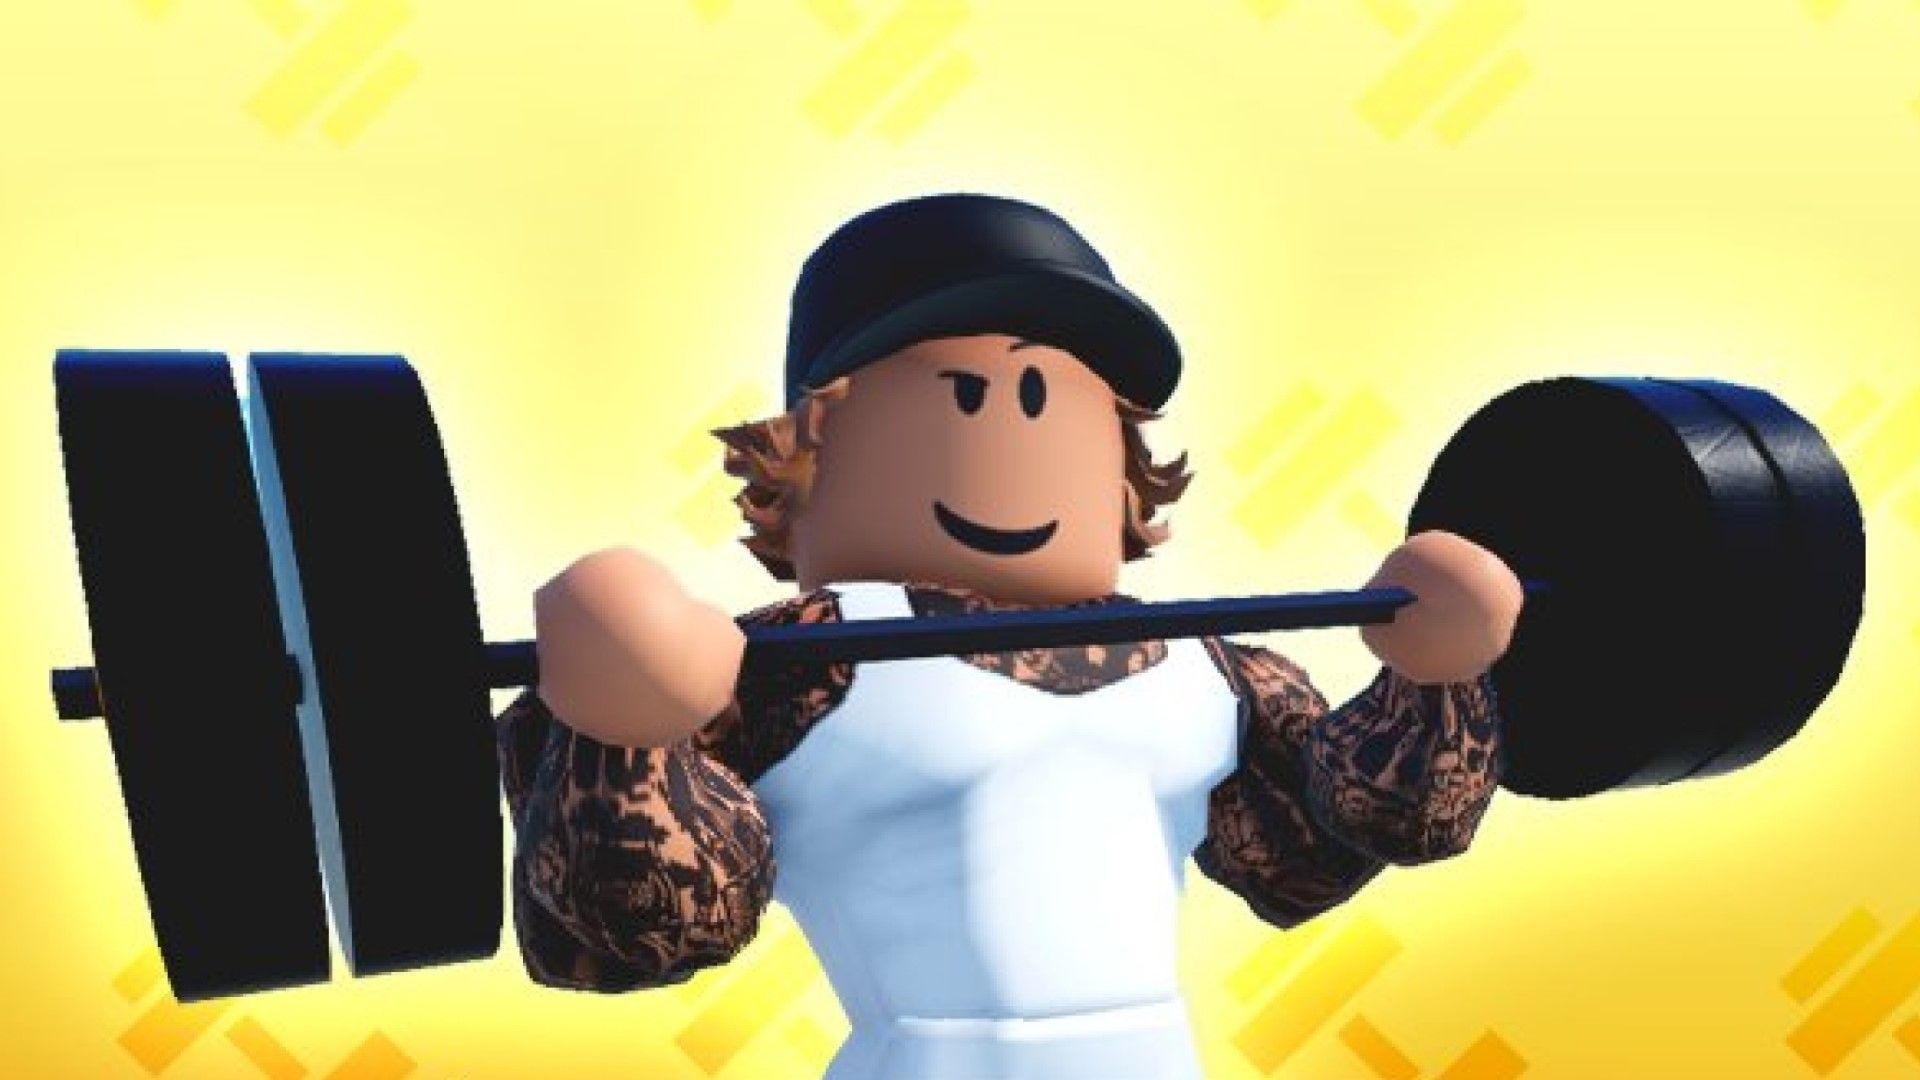 strongman-simulator-codes-free-boosts-and-pets-august-2021